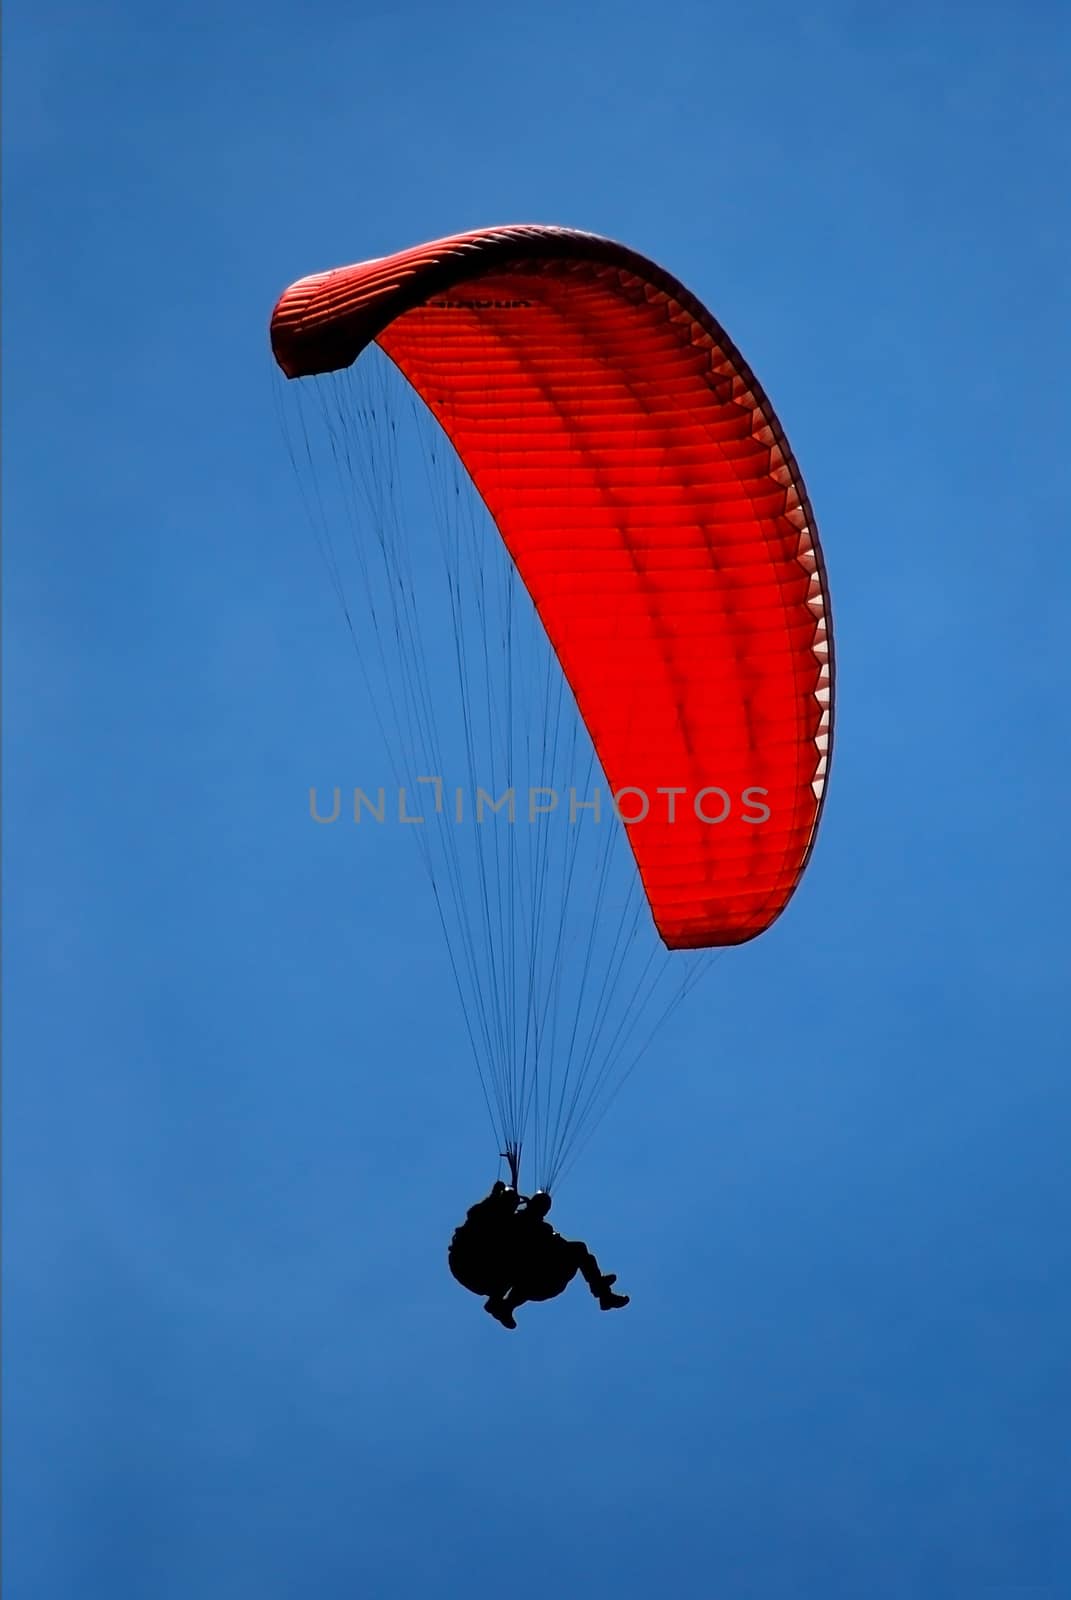 tandem paragliding in the blue sky, flying in the sky